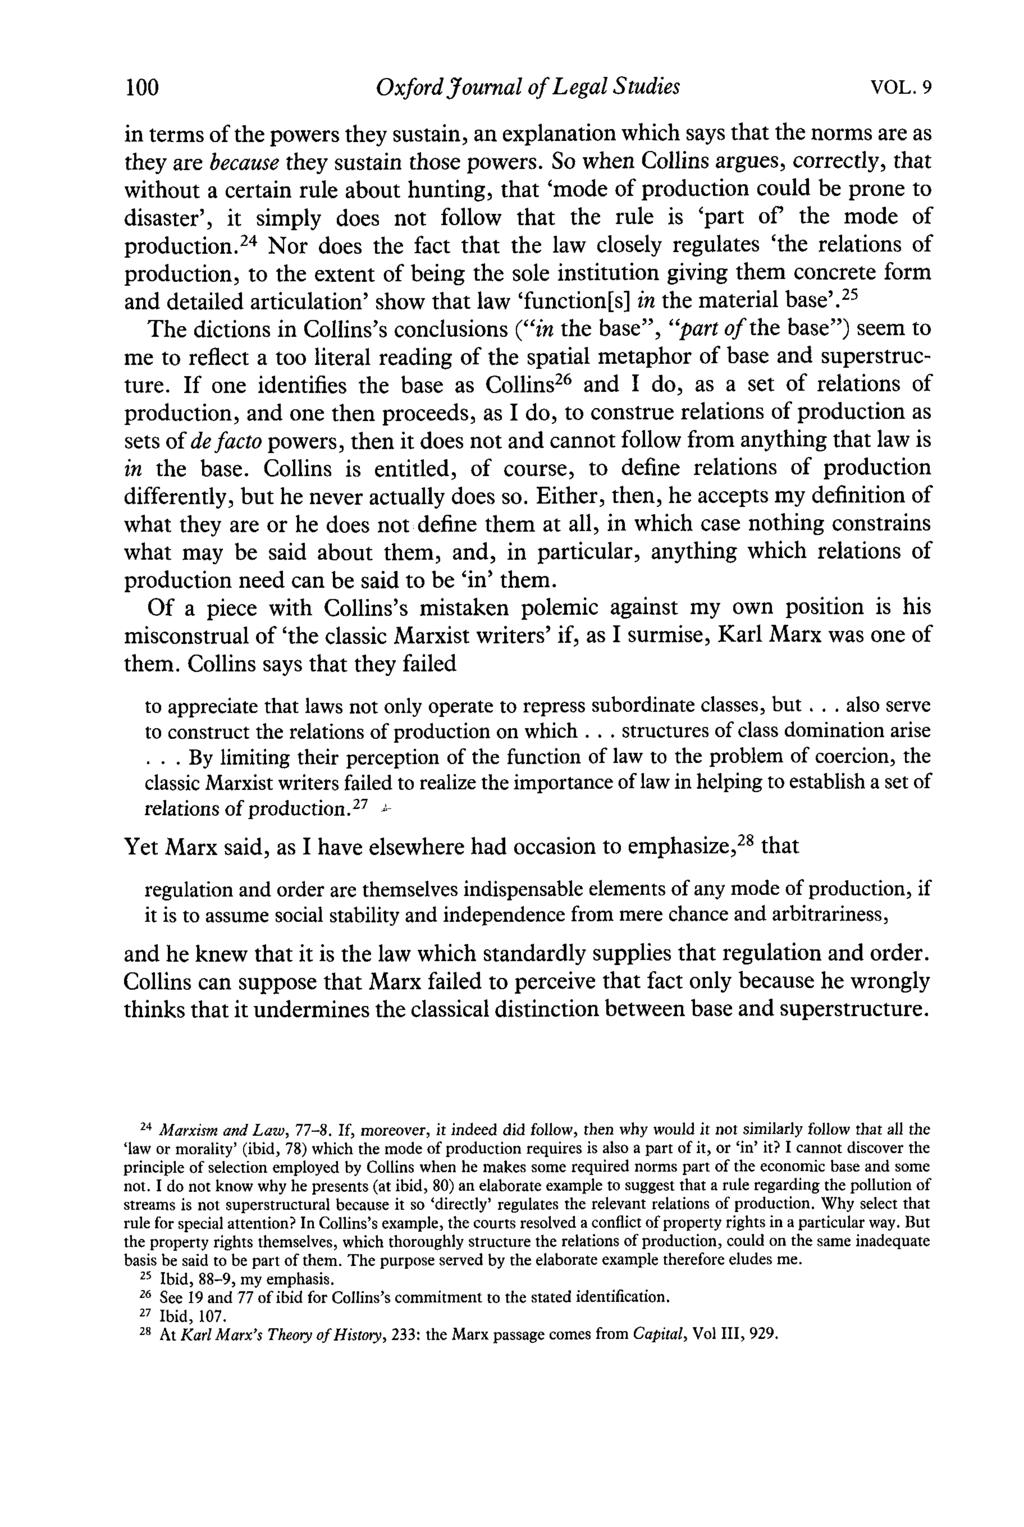 Oxford Journal of Legal Studies VOL. 9 in terms of the powers they sustain, an explanation which says that the norms are as they are because they sustain those powers.